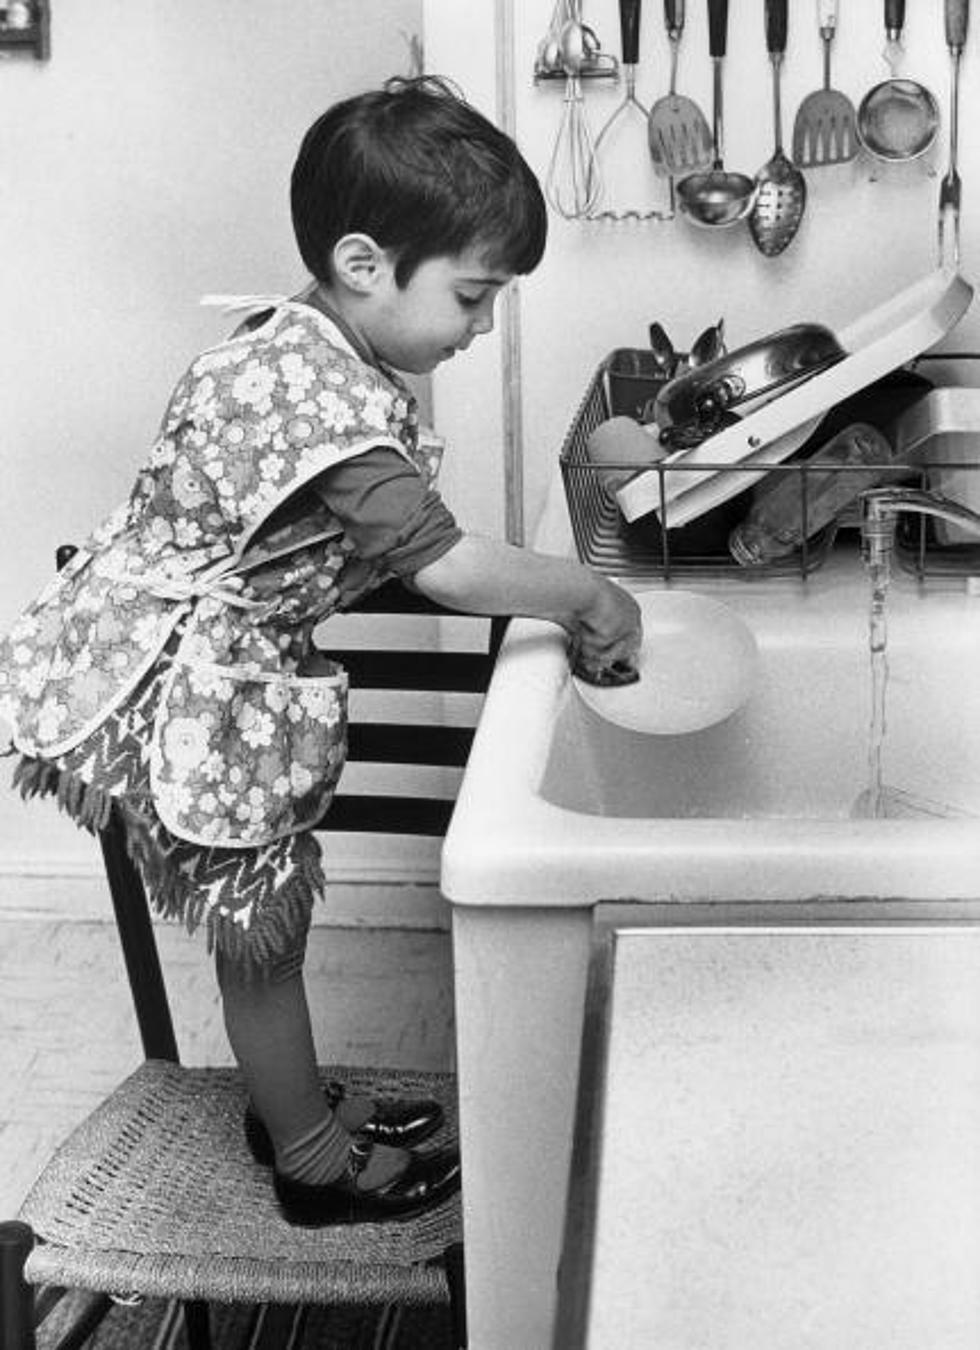 How Old Should Your Kids Be When They Start Chores?